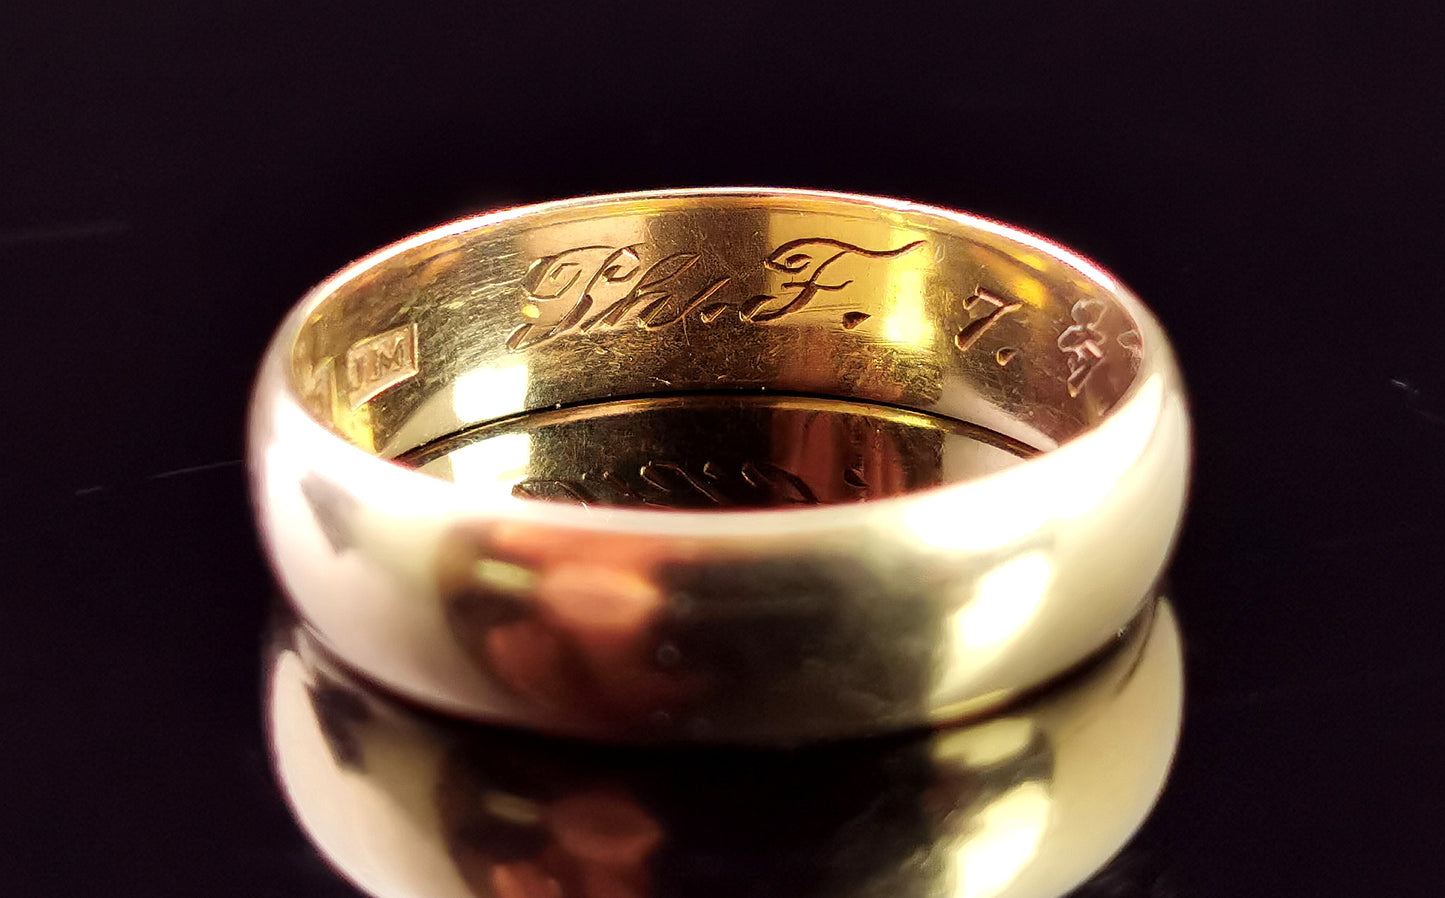 Antique 14ct gold wedding band ring, engraved